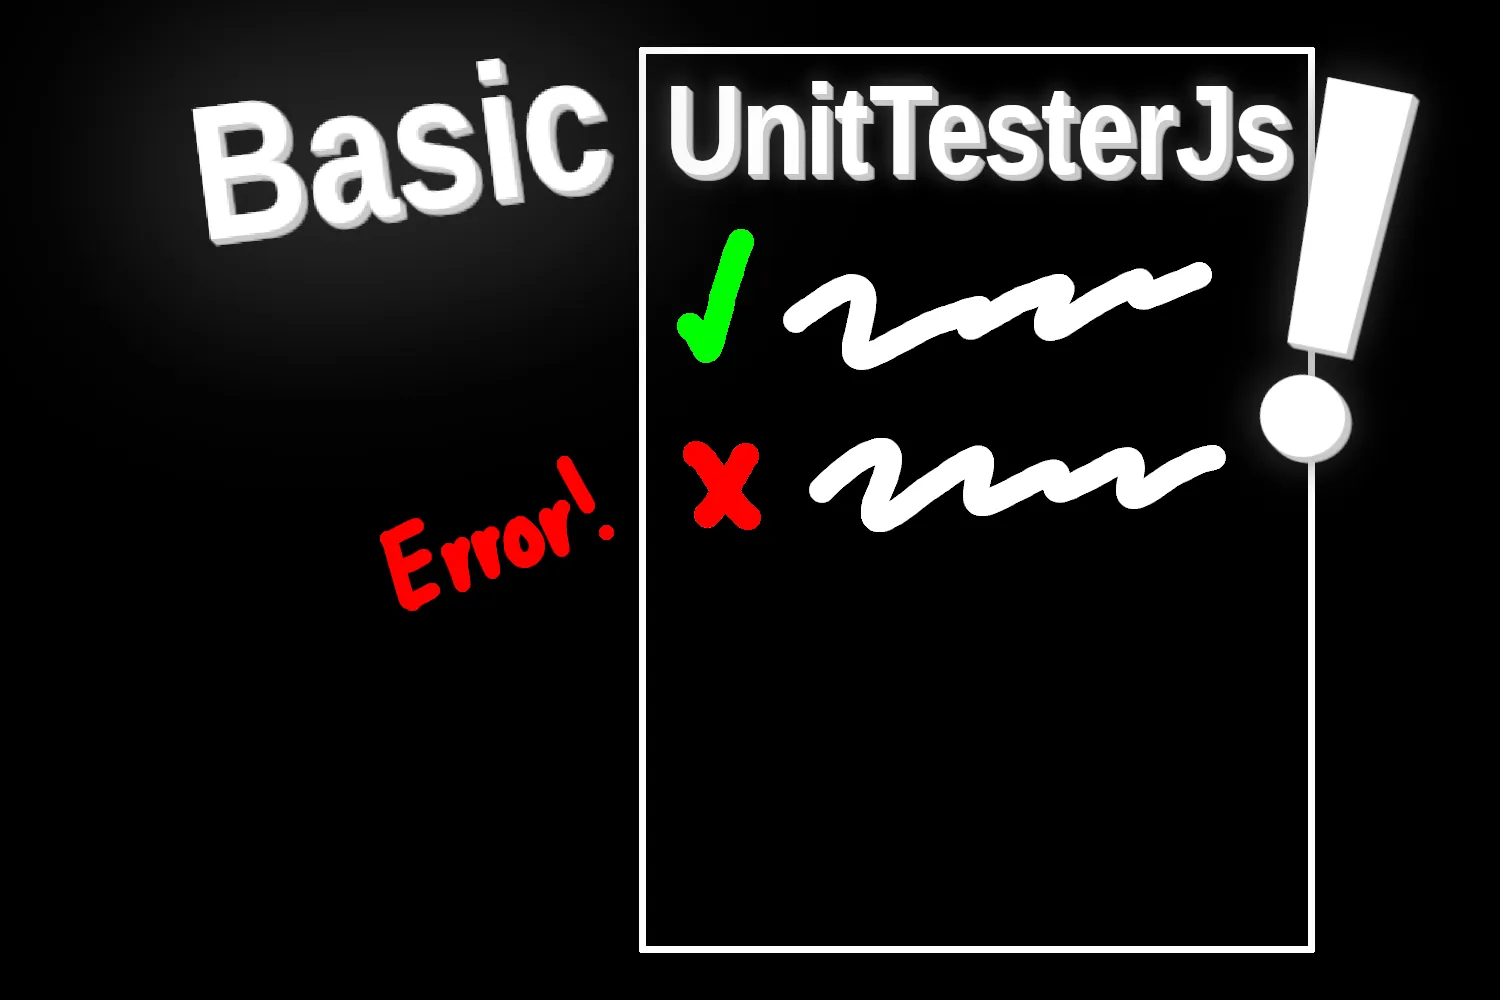 An image of the word "BasicUnitTesterJs" with "Basic" on the side of and "UnitTesterJs" being on a test paper with a check and x as well as an exclamation mark on the right and a little bit of text on the left saying "Error!"